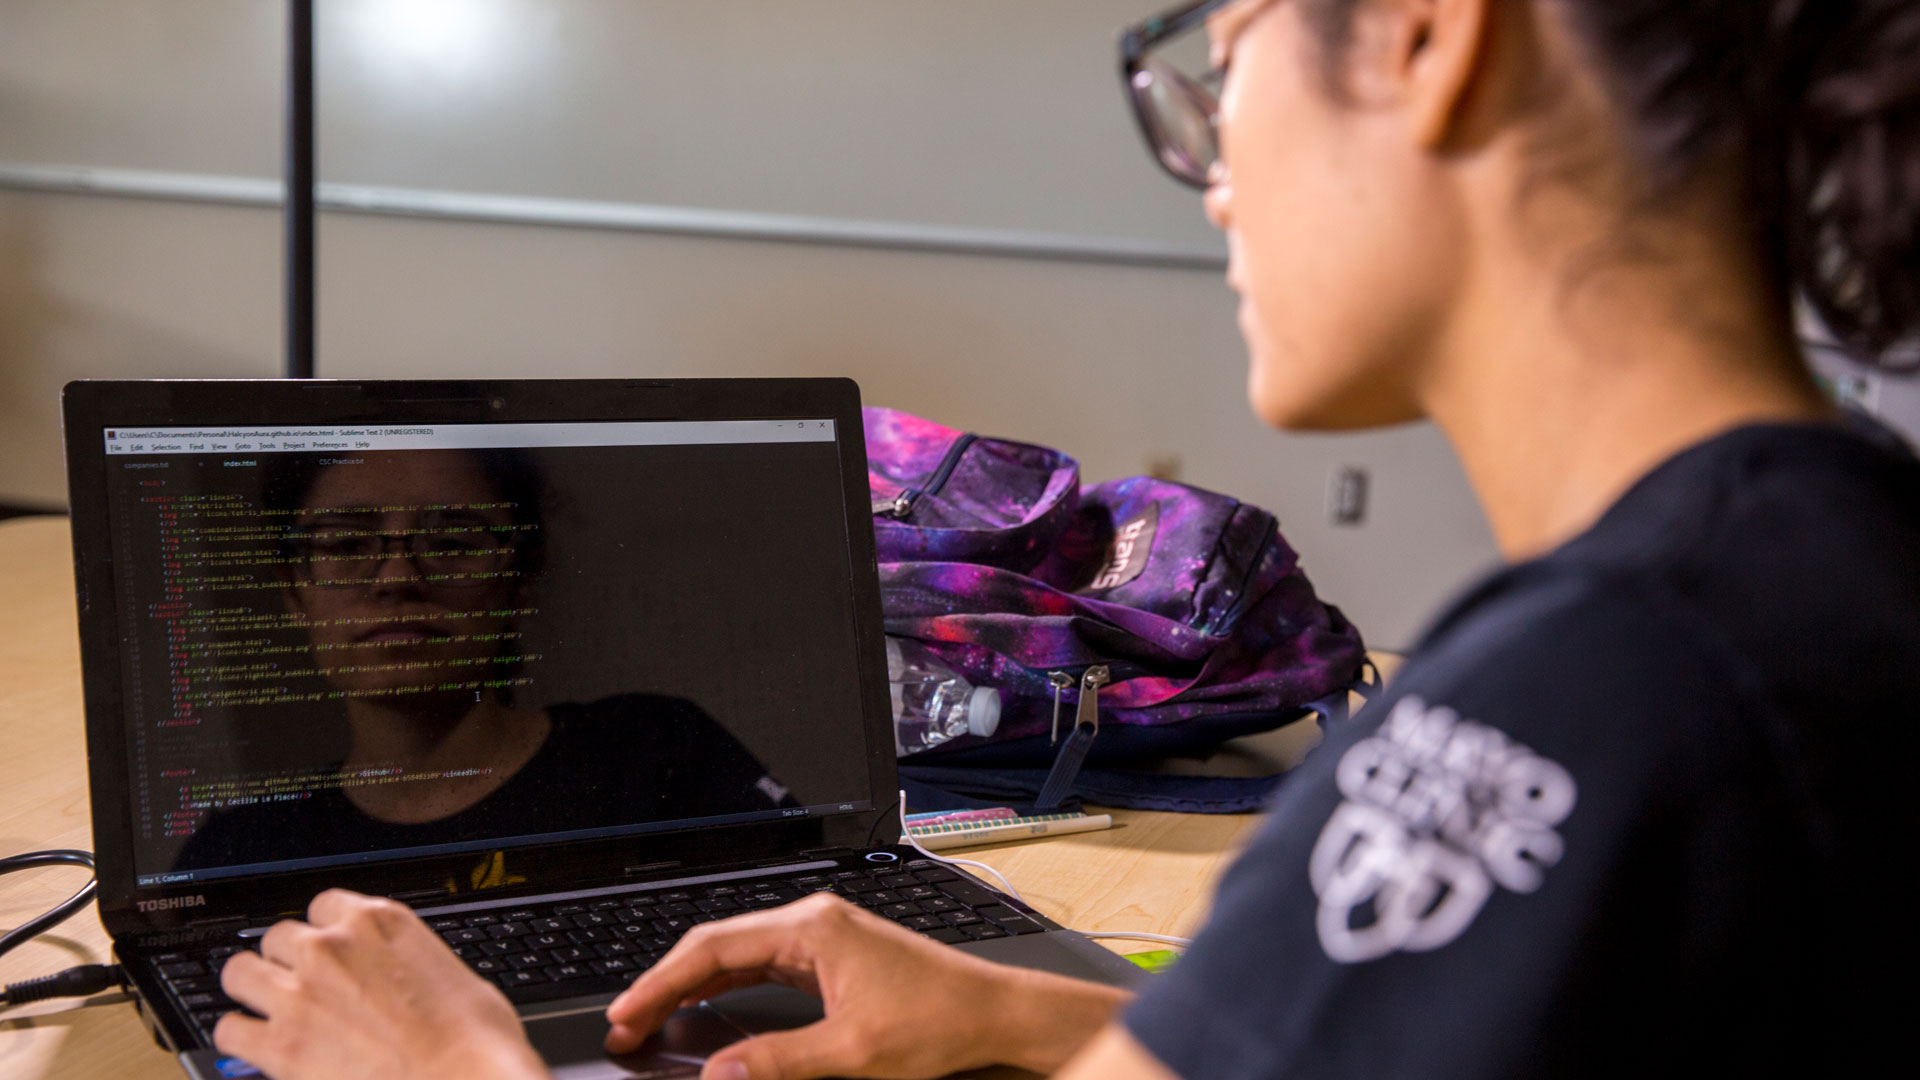 A photo of a student writing code with their reflection in the laptop screen.